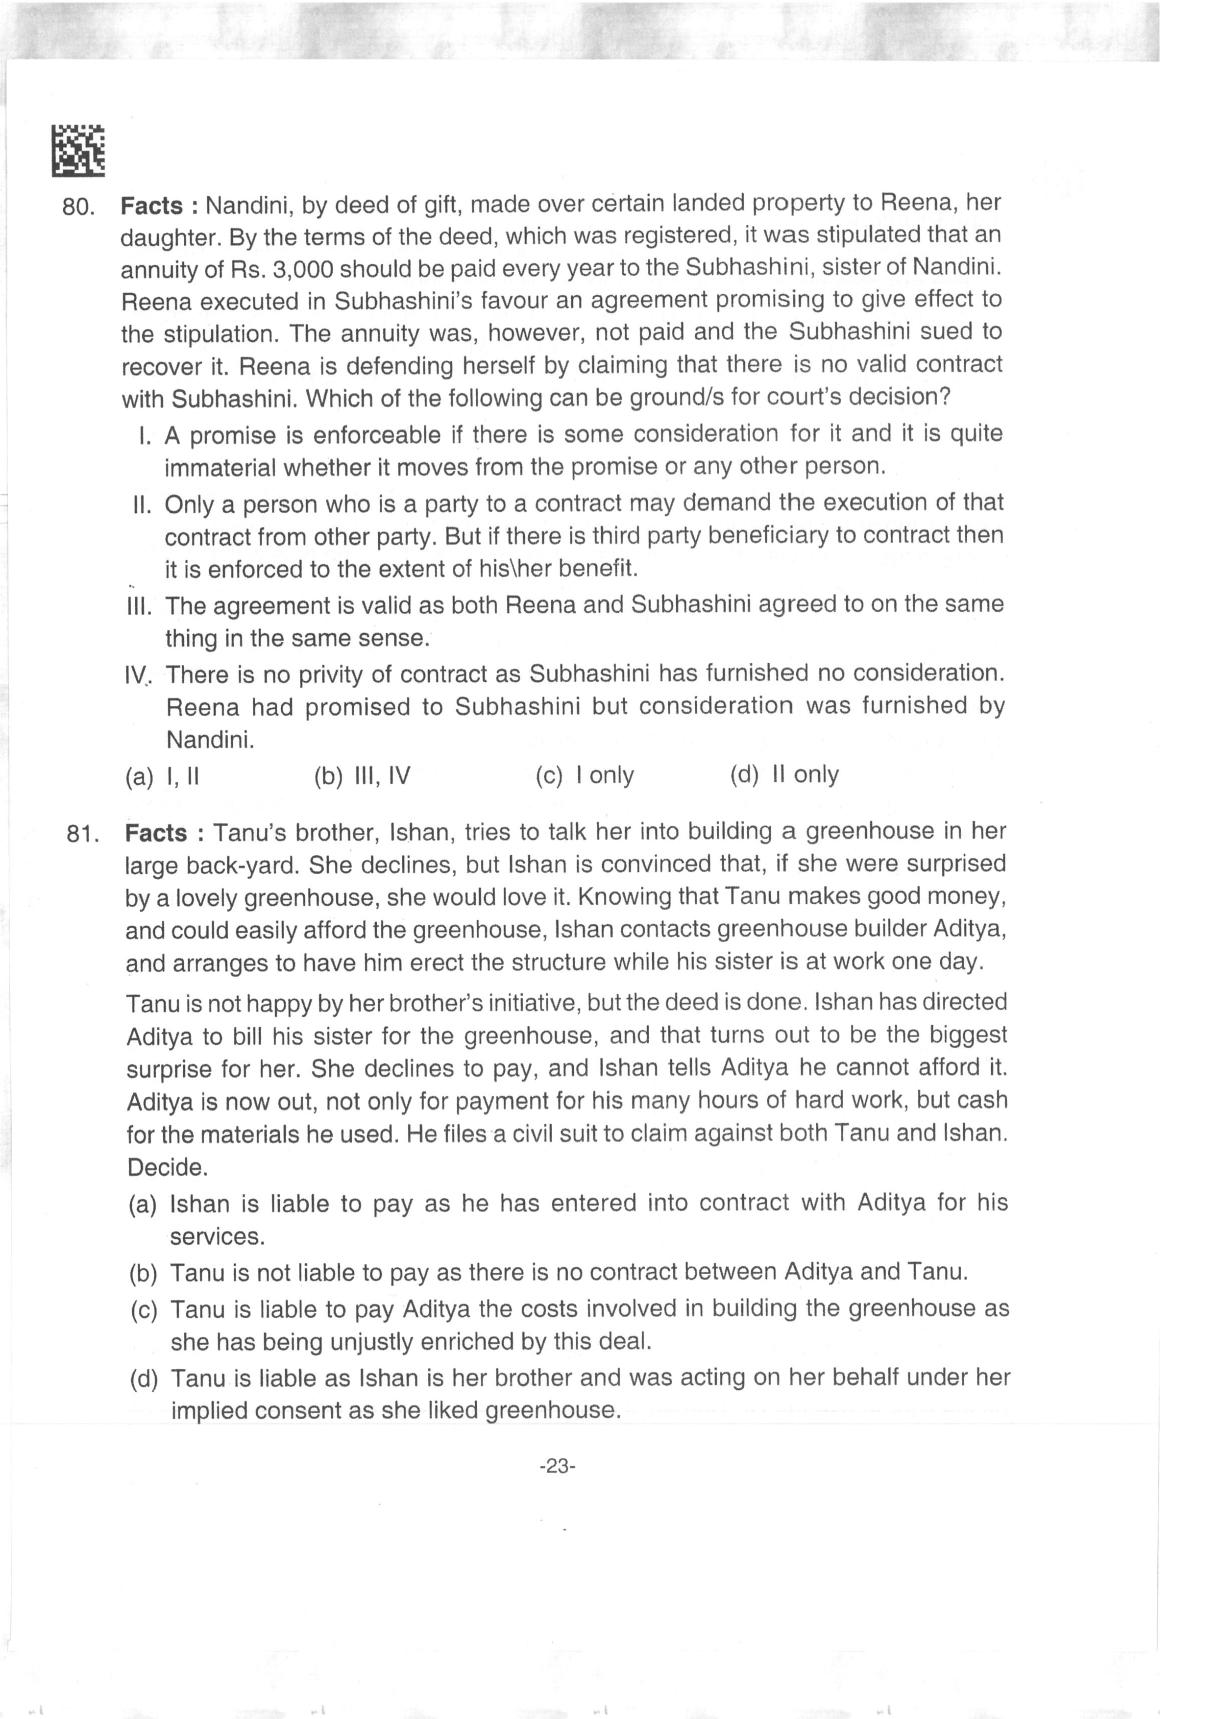 AILET 2019 Question Paper for BA LLB - Page 23